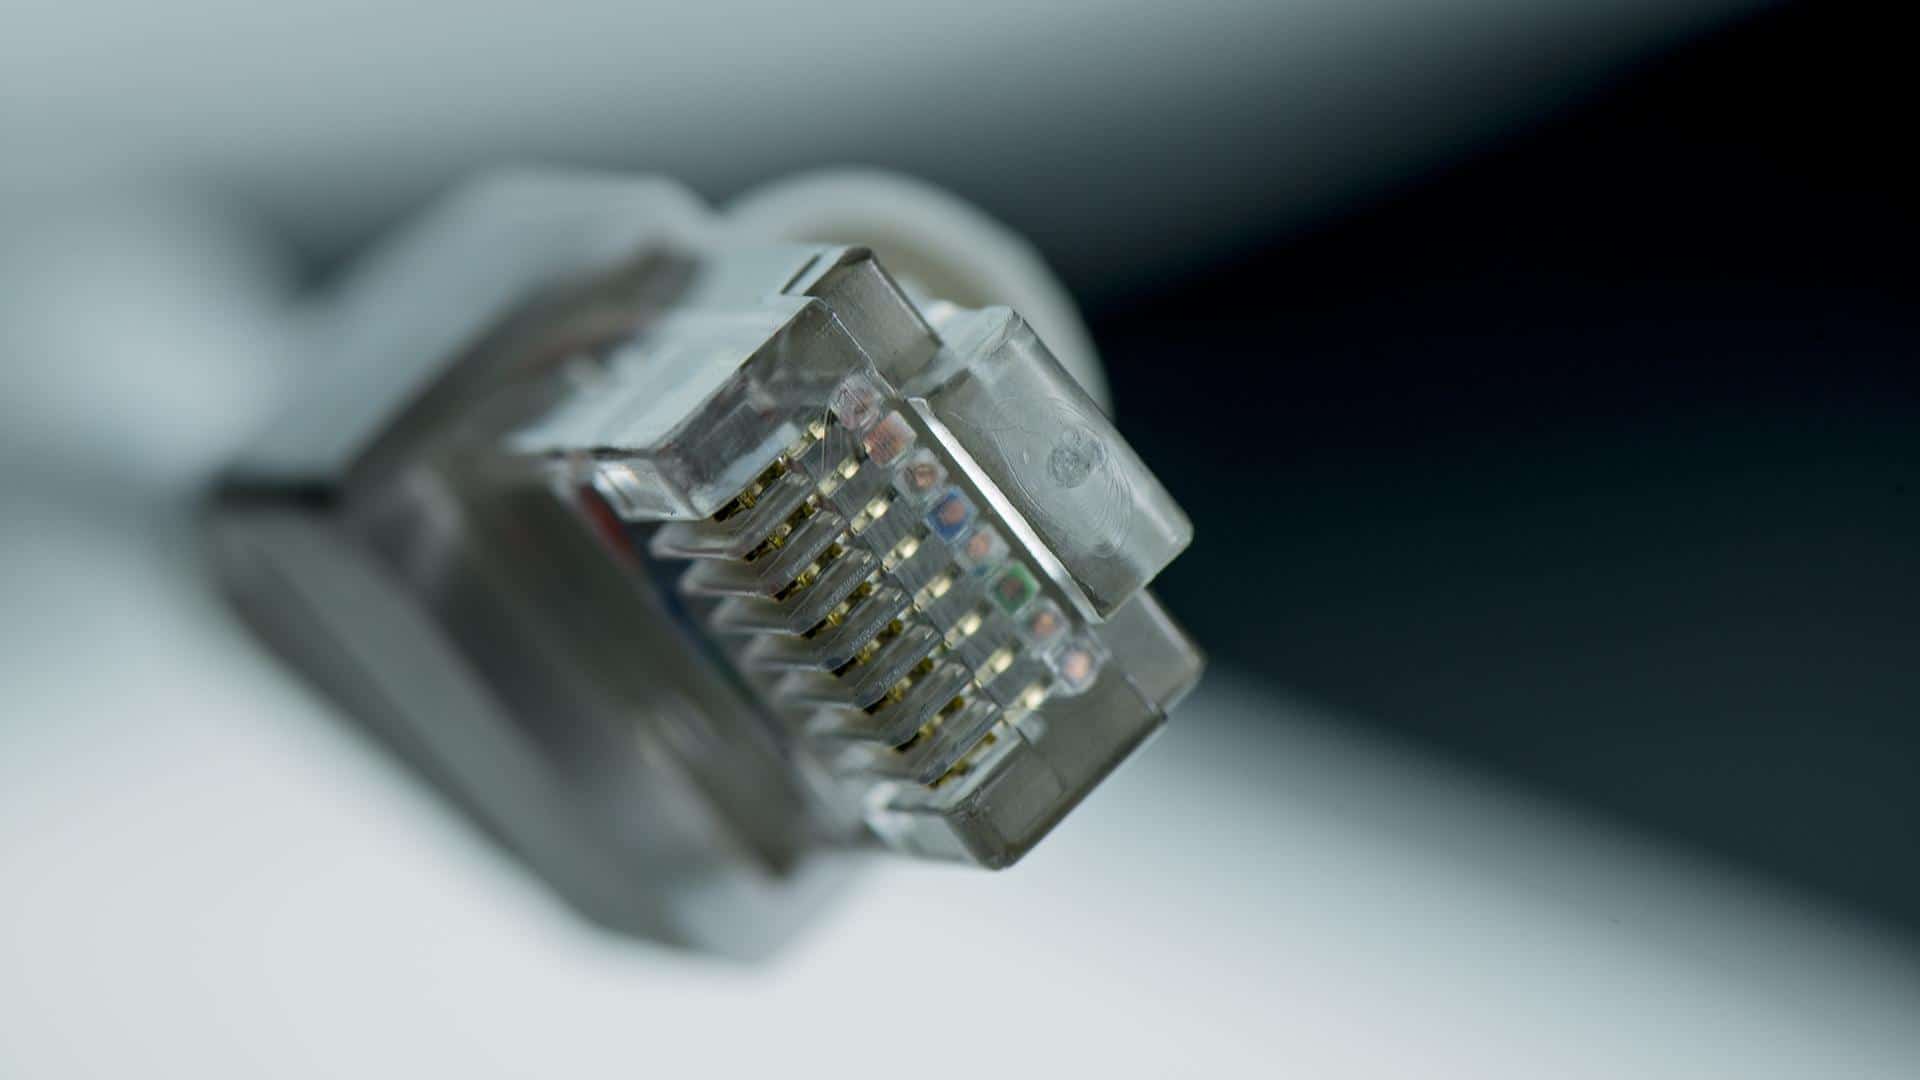 Keywords: ethernet cable

Description: A close-up of an ethernet cable connecting devices for efficient internet connection.